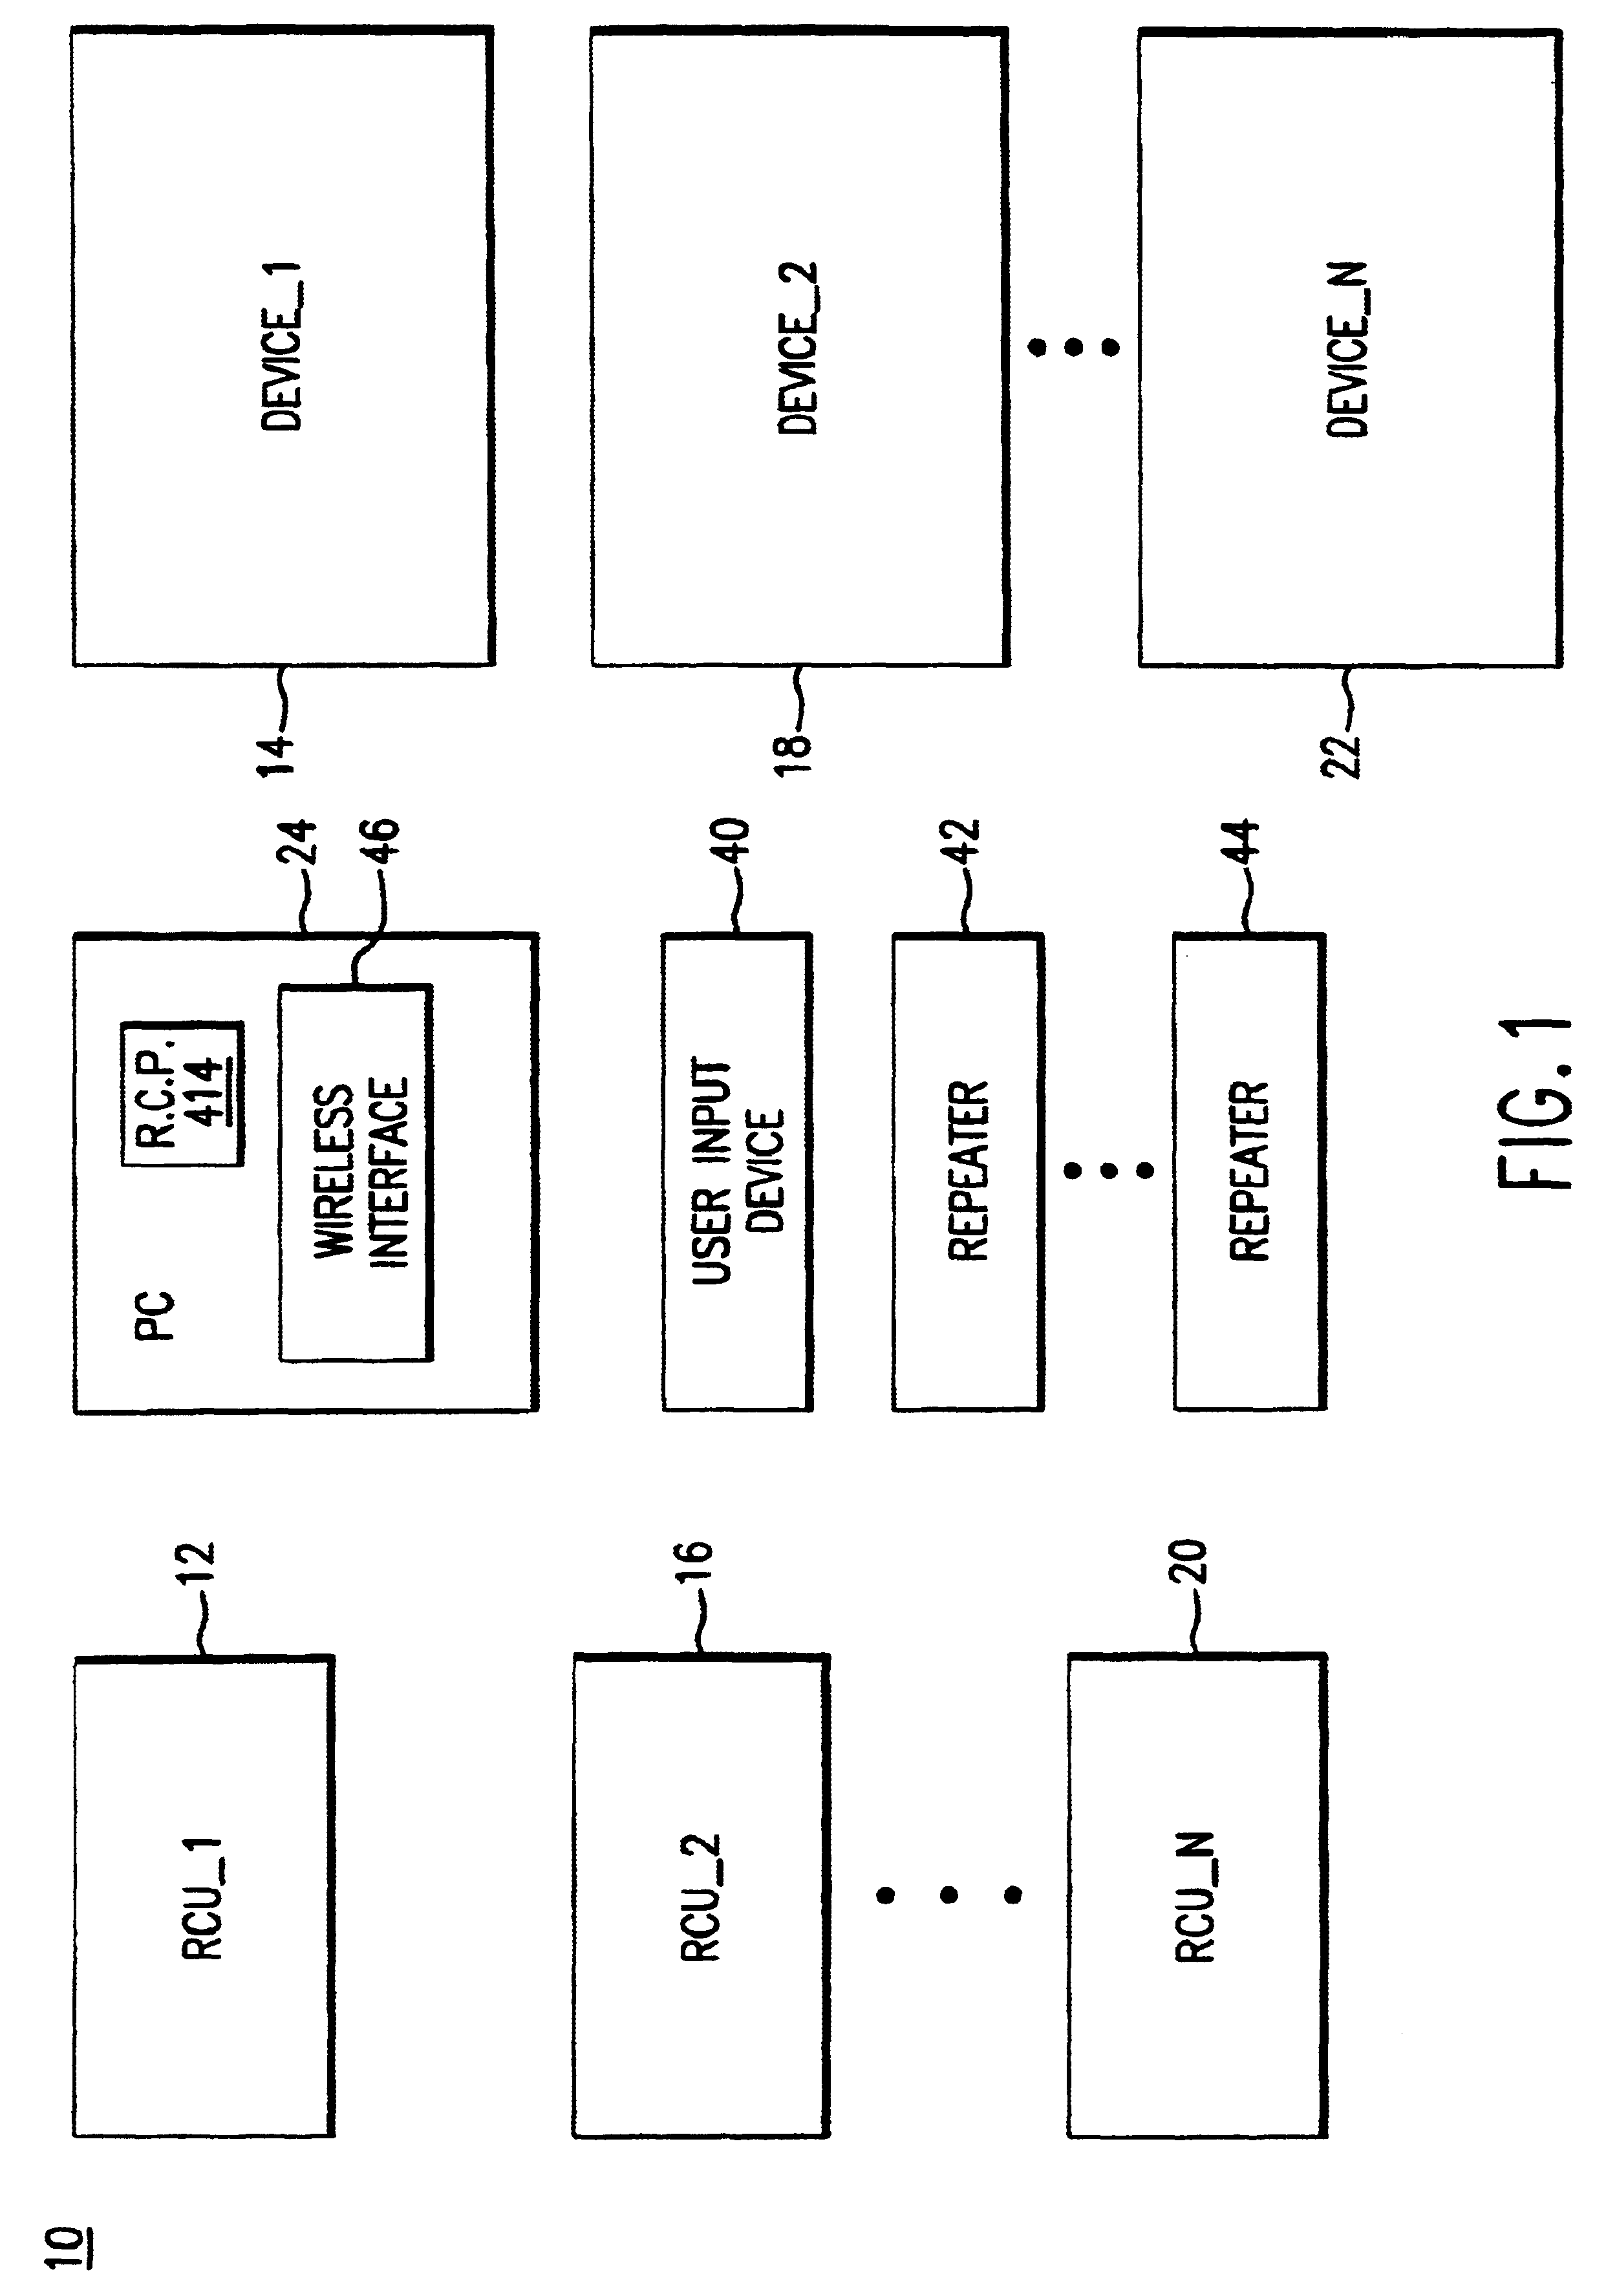 Method and apparatus for allowing a personal computer to control one or more devices